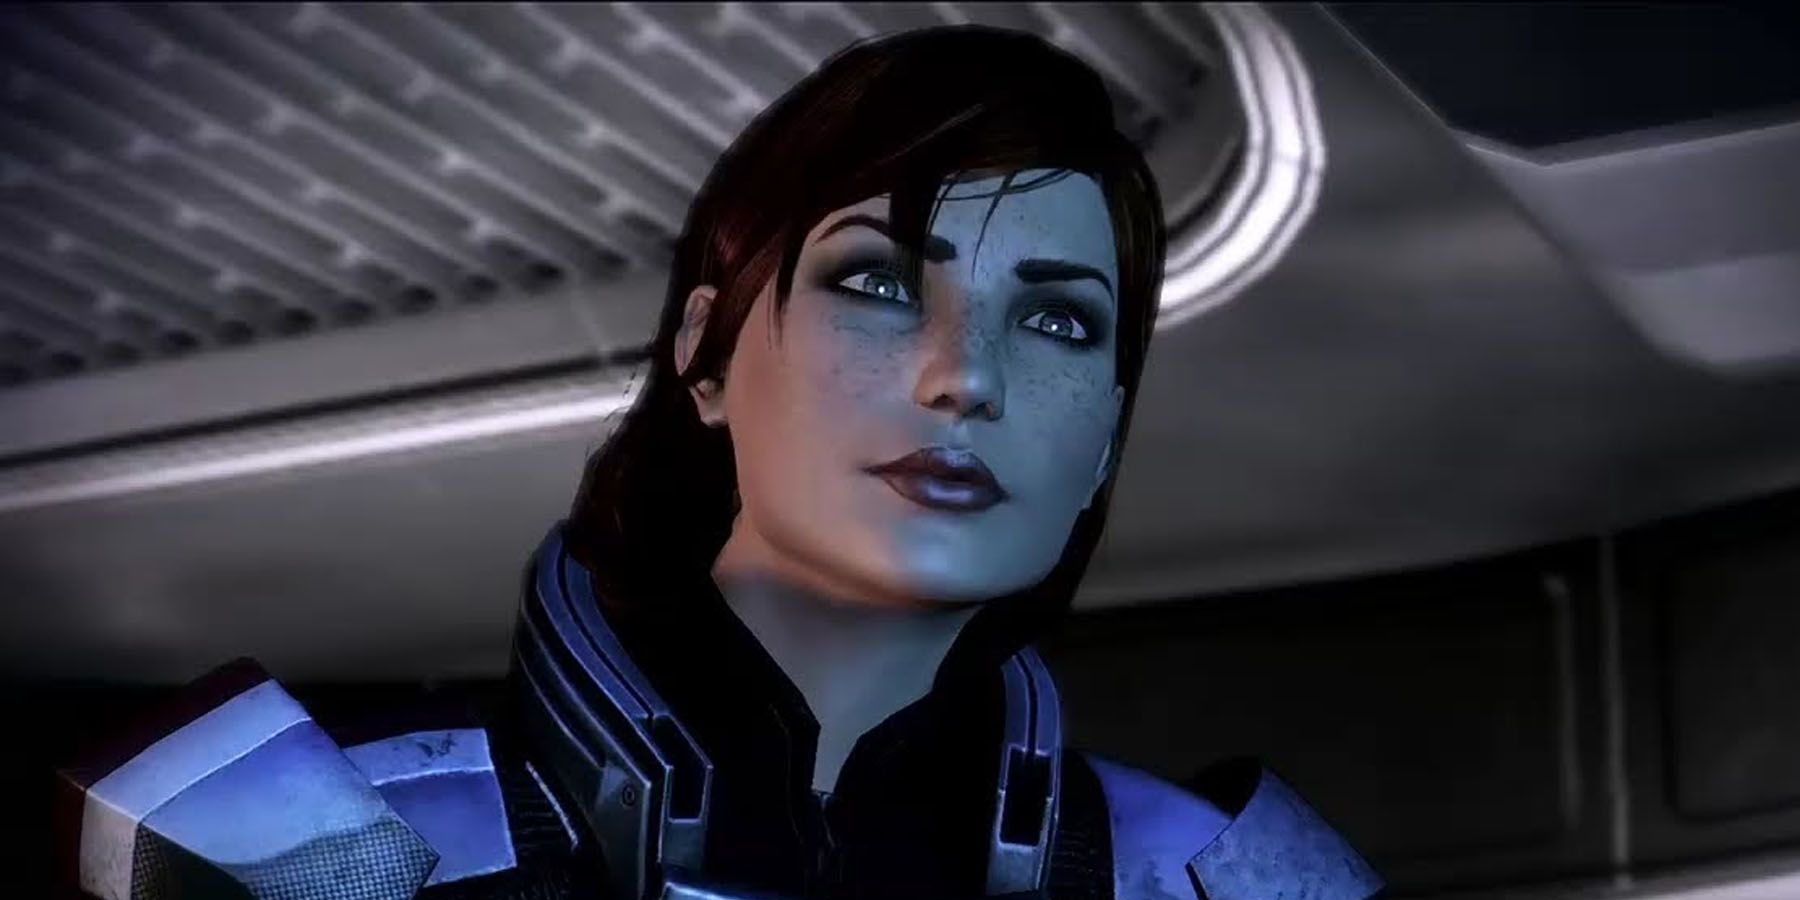 A close-up of the female Commader Shepard in Mass Effect 3.